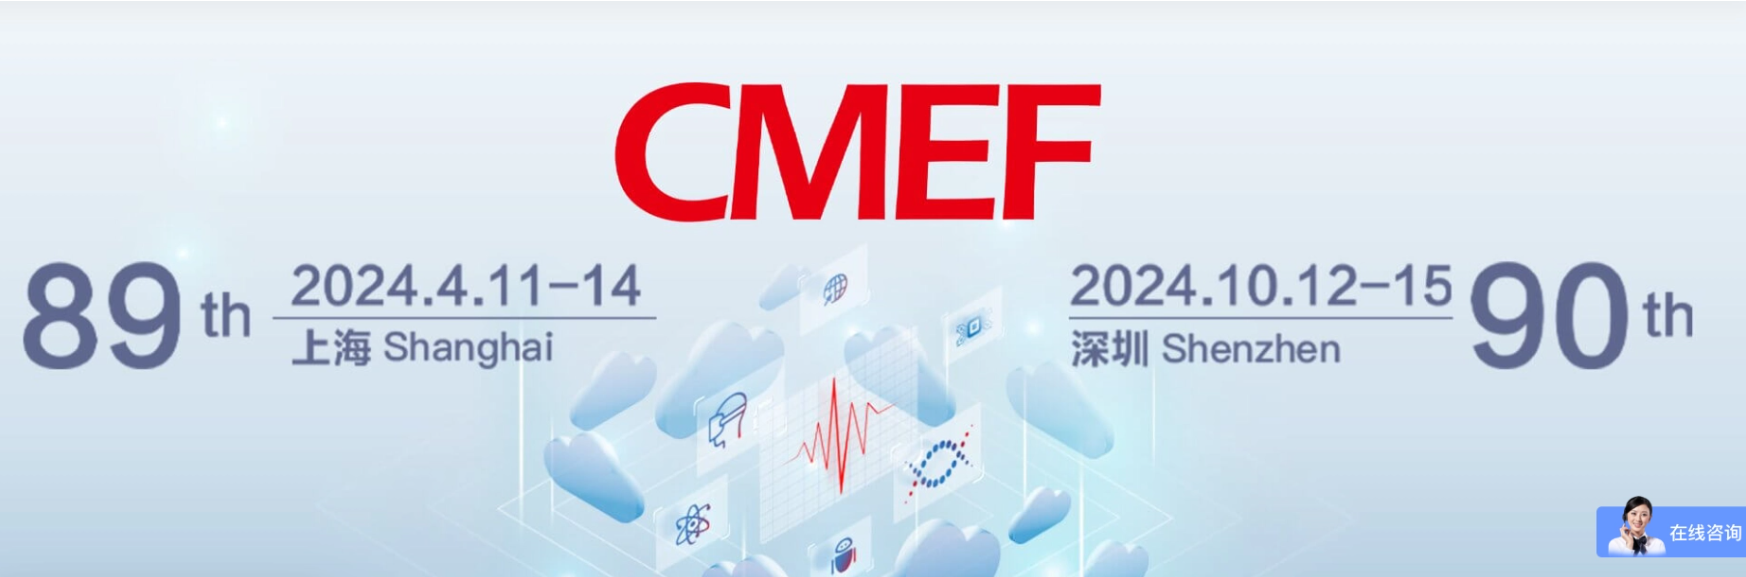 Focus on New Science And Technology To View The Whole Industry - The 89th CMEF China International Medical Equipment Expo Is Here As Scheduled!